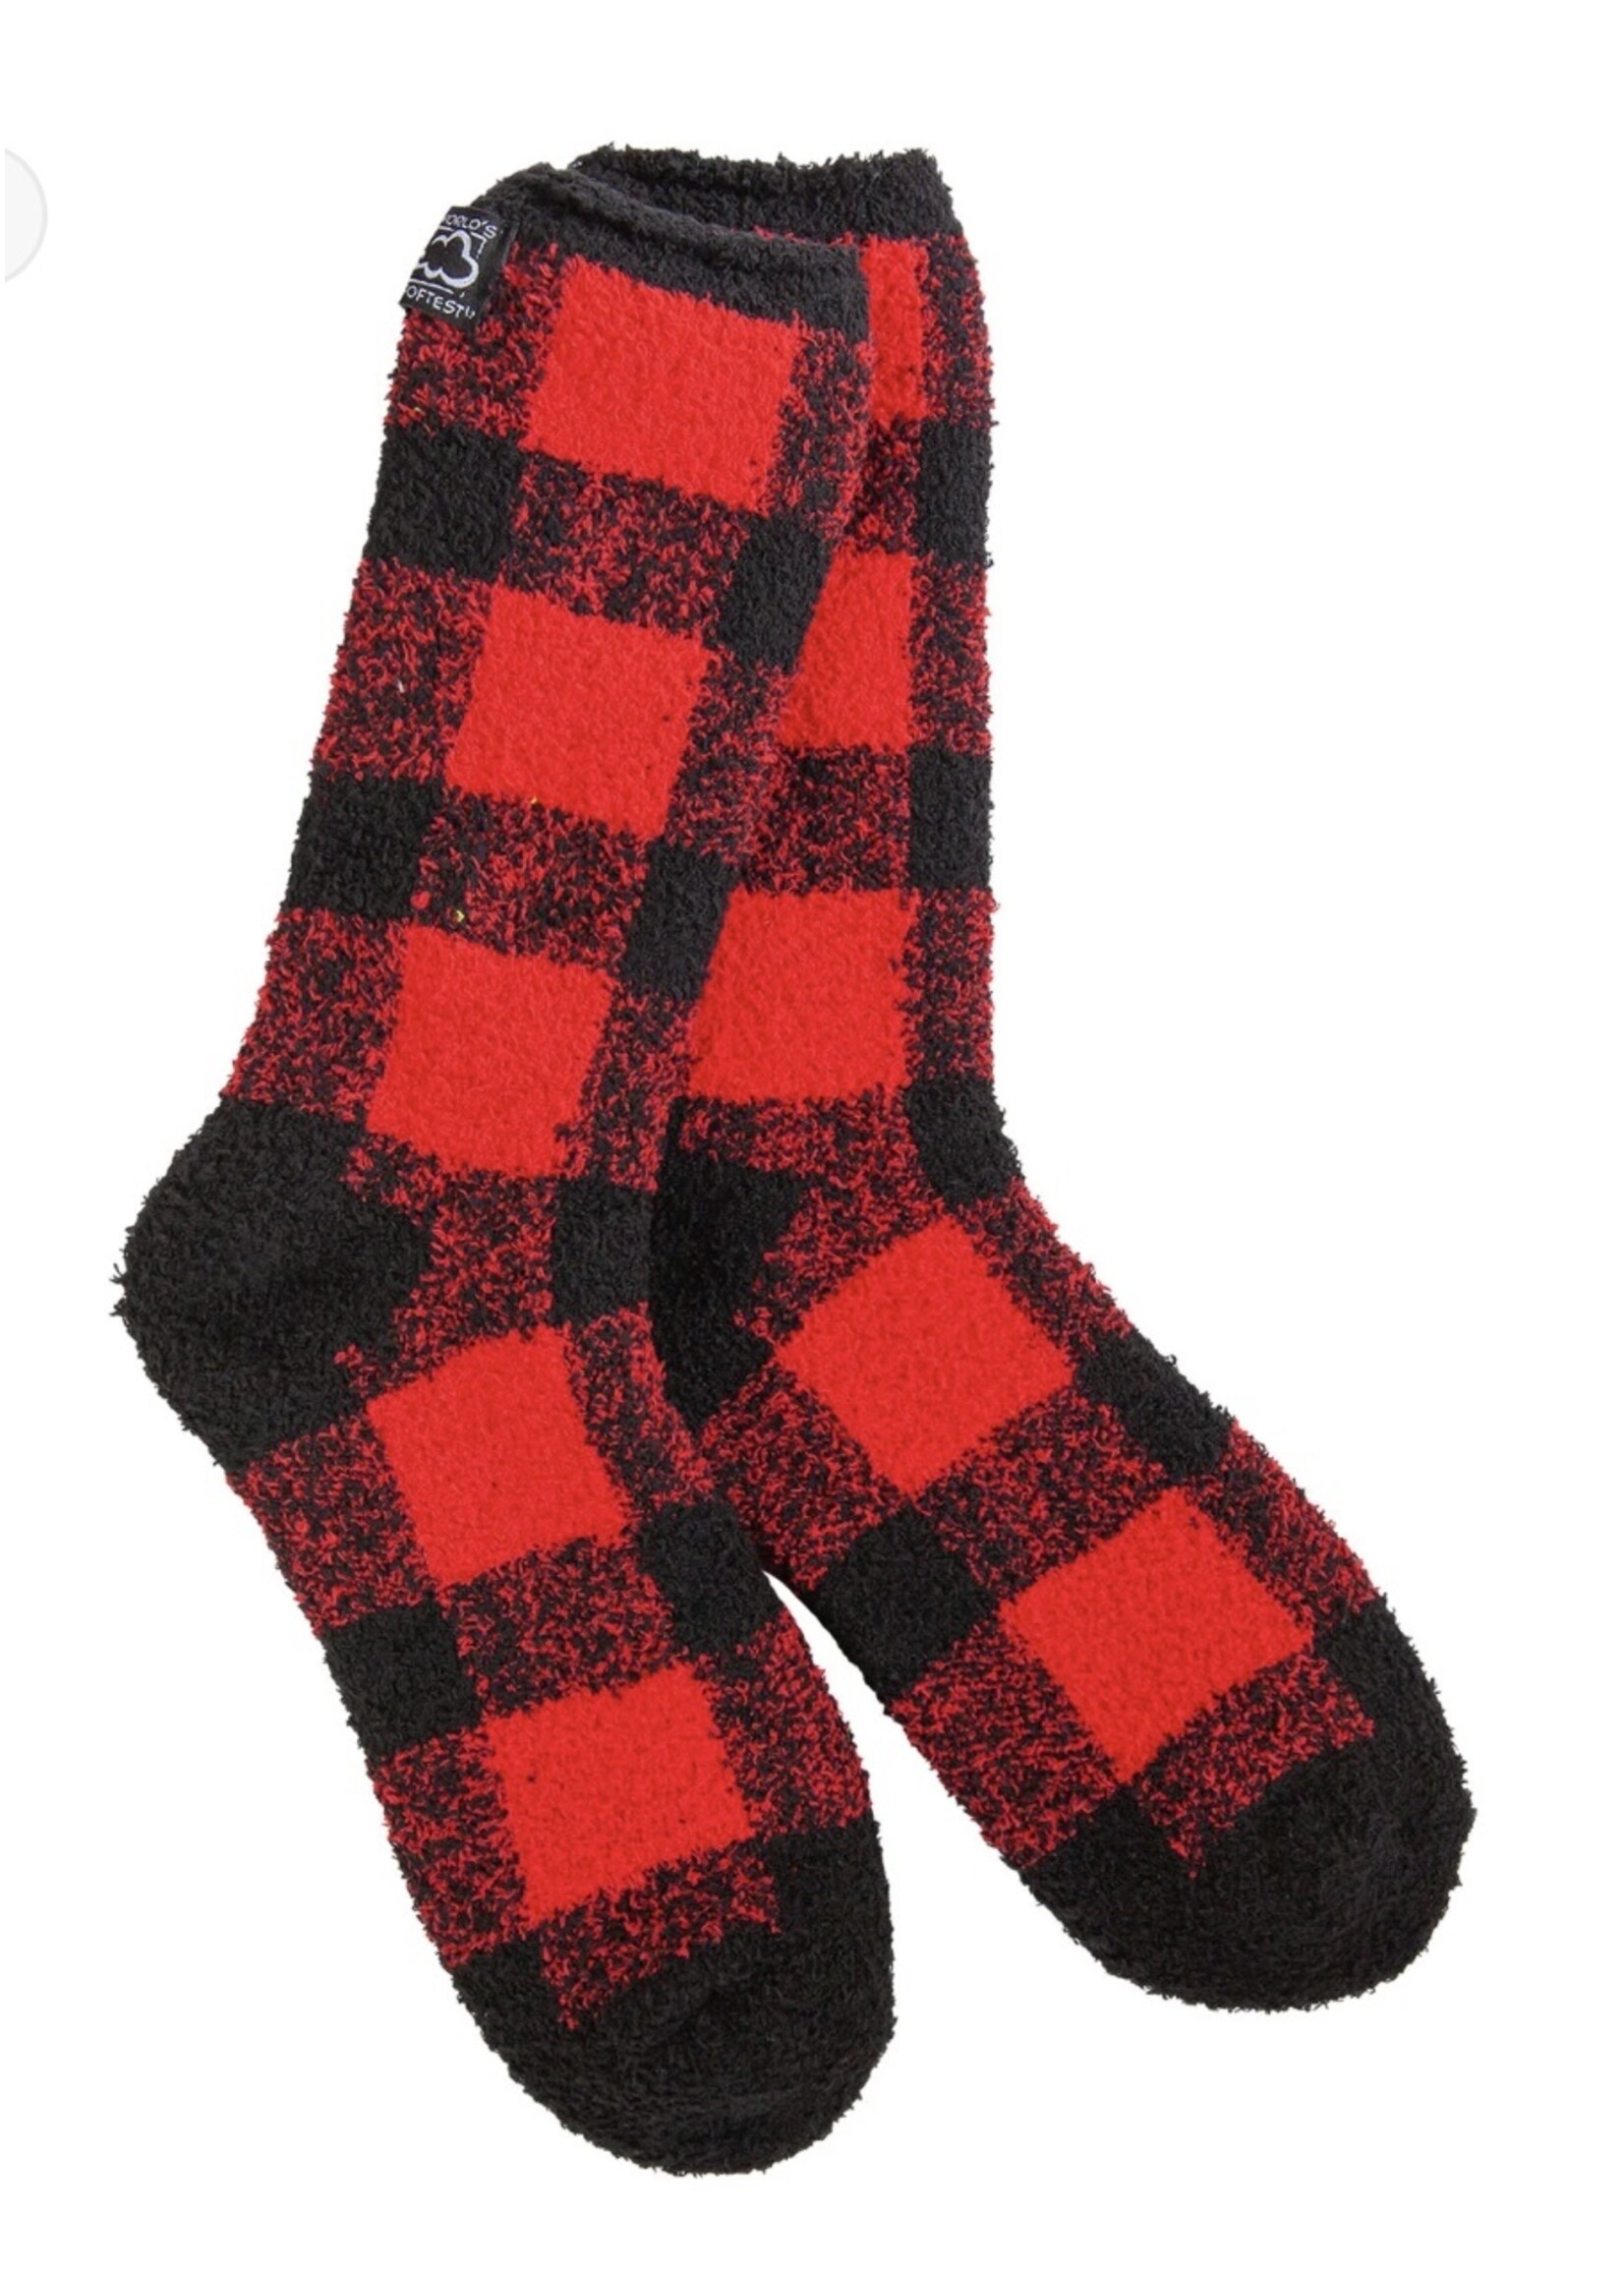 Team Collection Cozy Socks-Red/Black